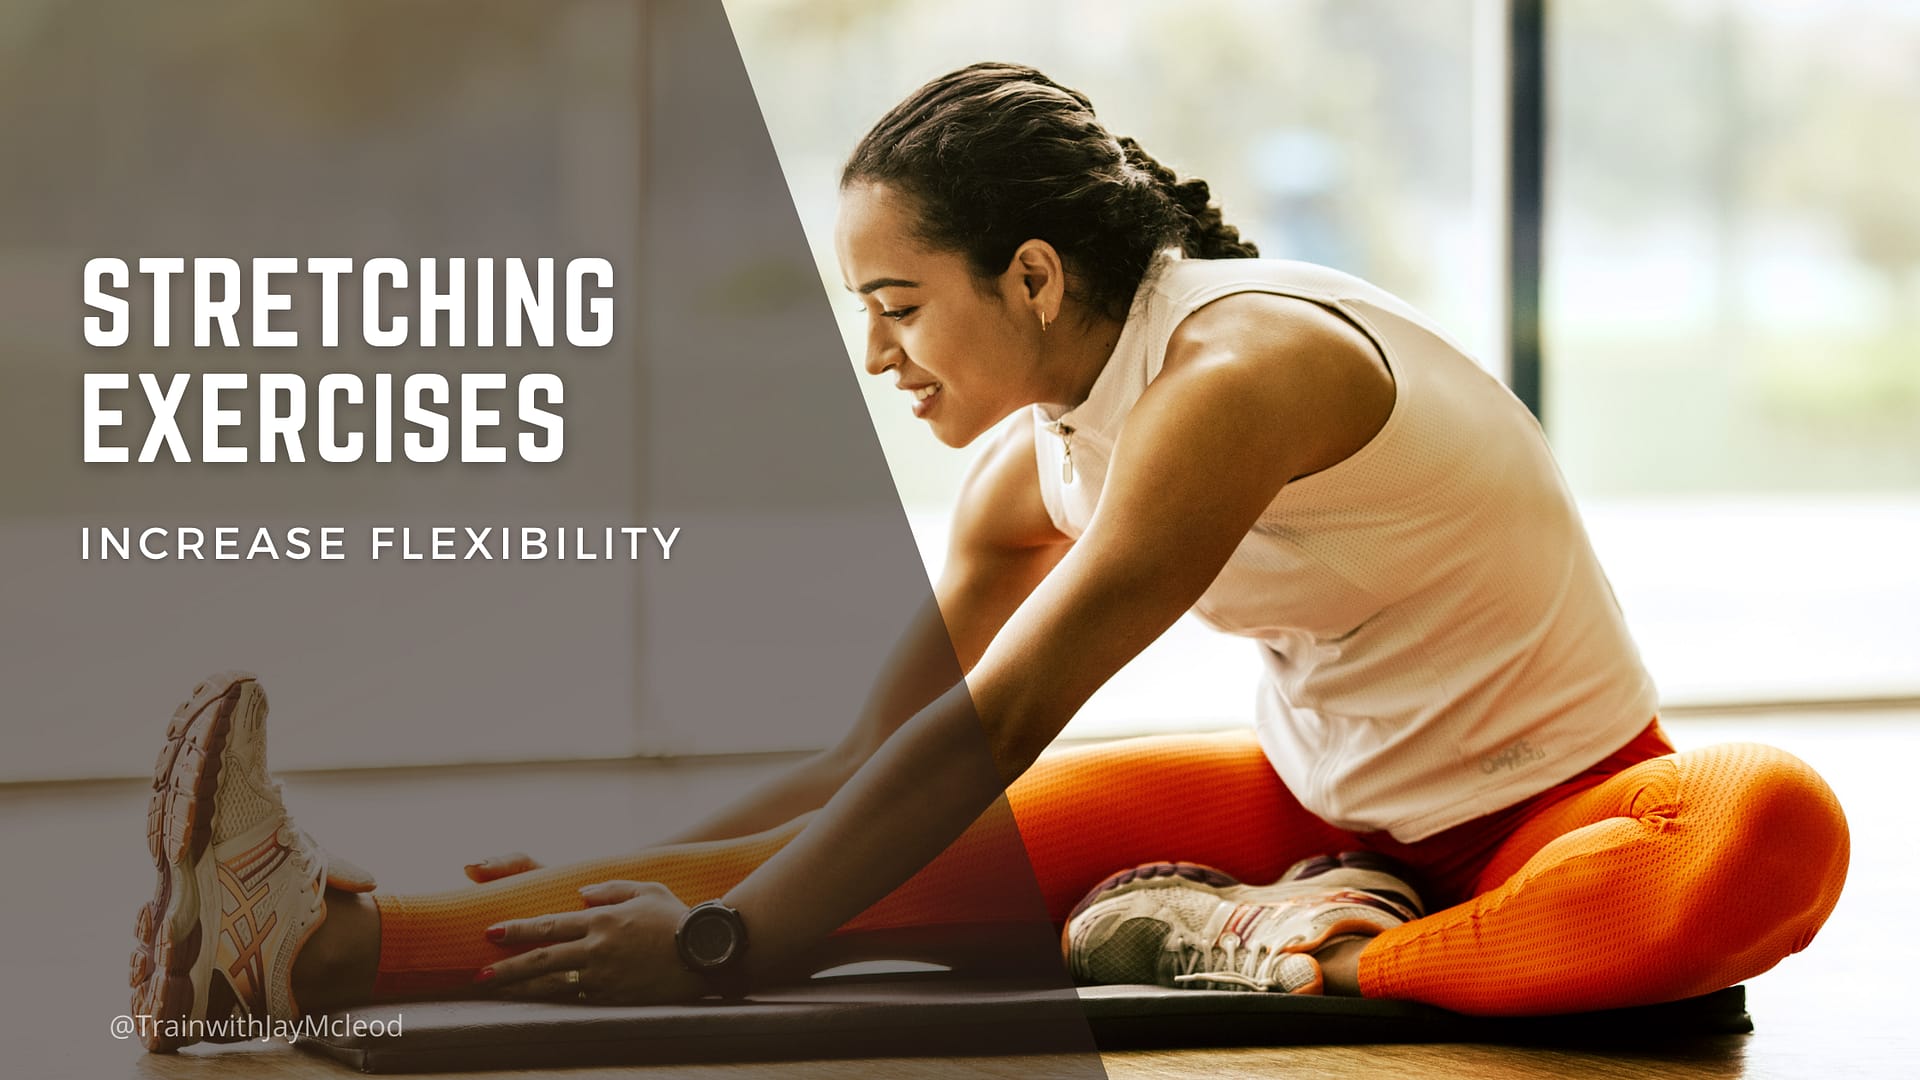 Stretching Exercises for Flexibility | Personal Training Bel Air, California